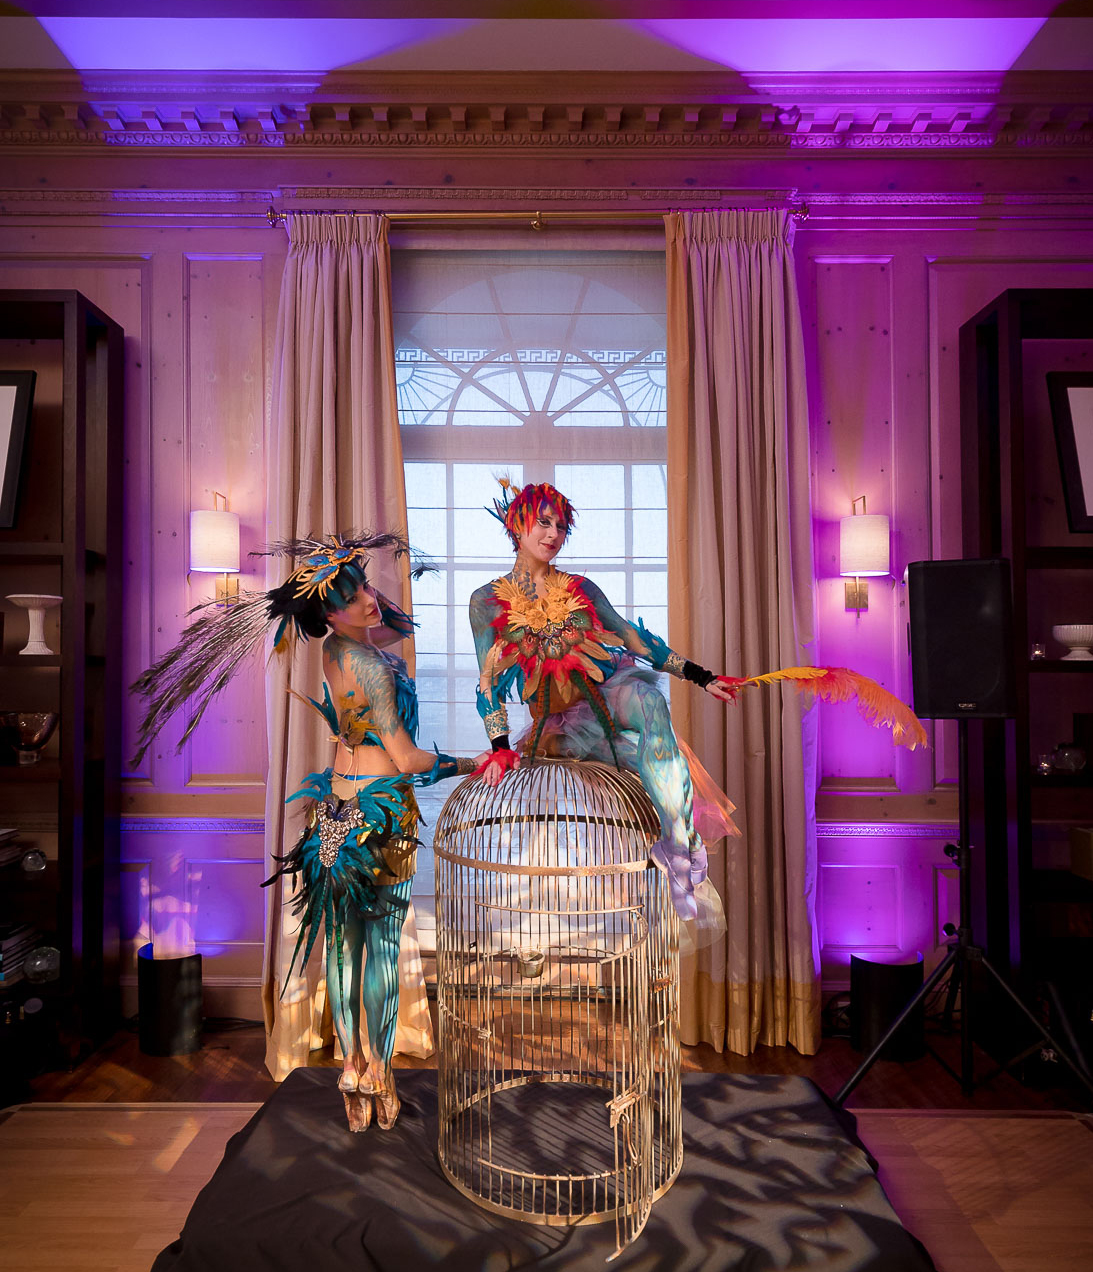 Catalyst Arts body painted birds of paradise ballerinas with giant golden cage in penthouse for private birthday event